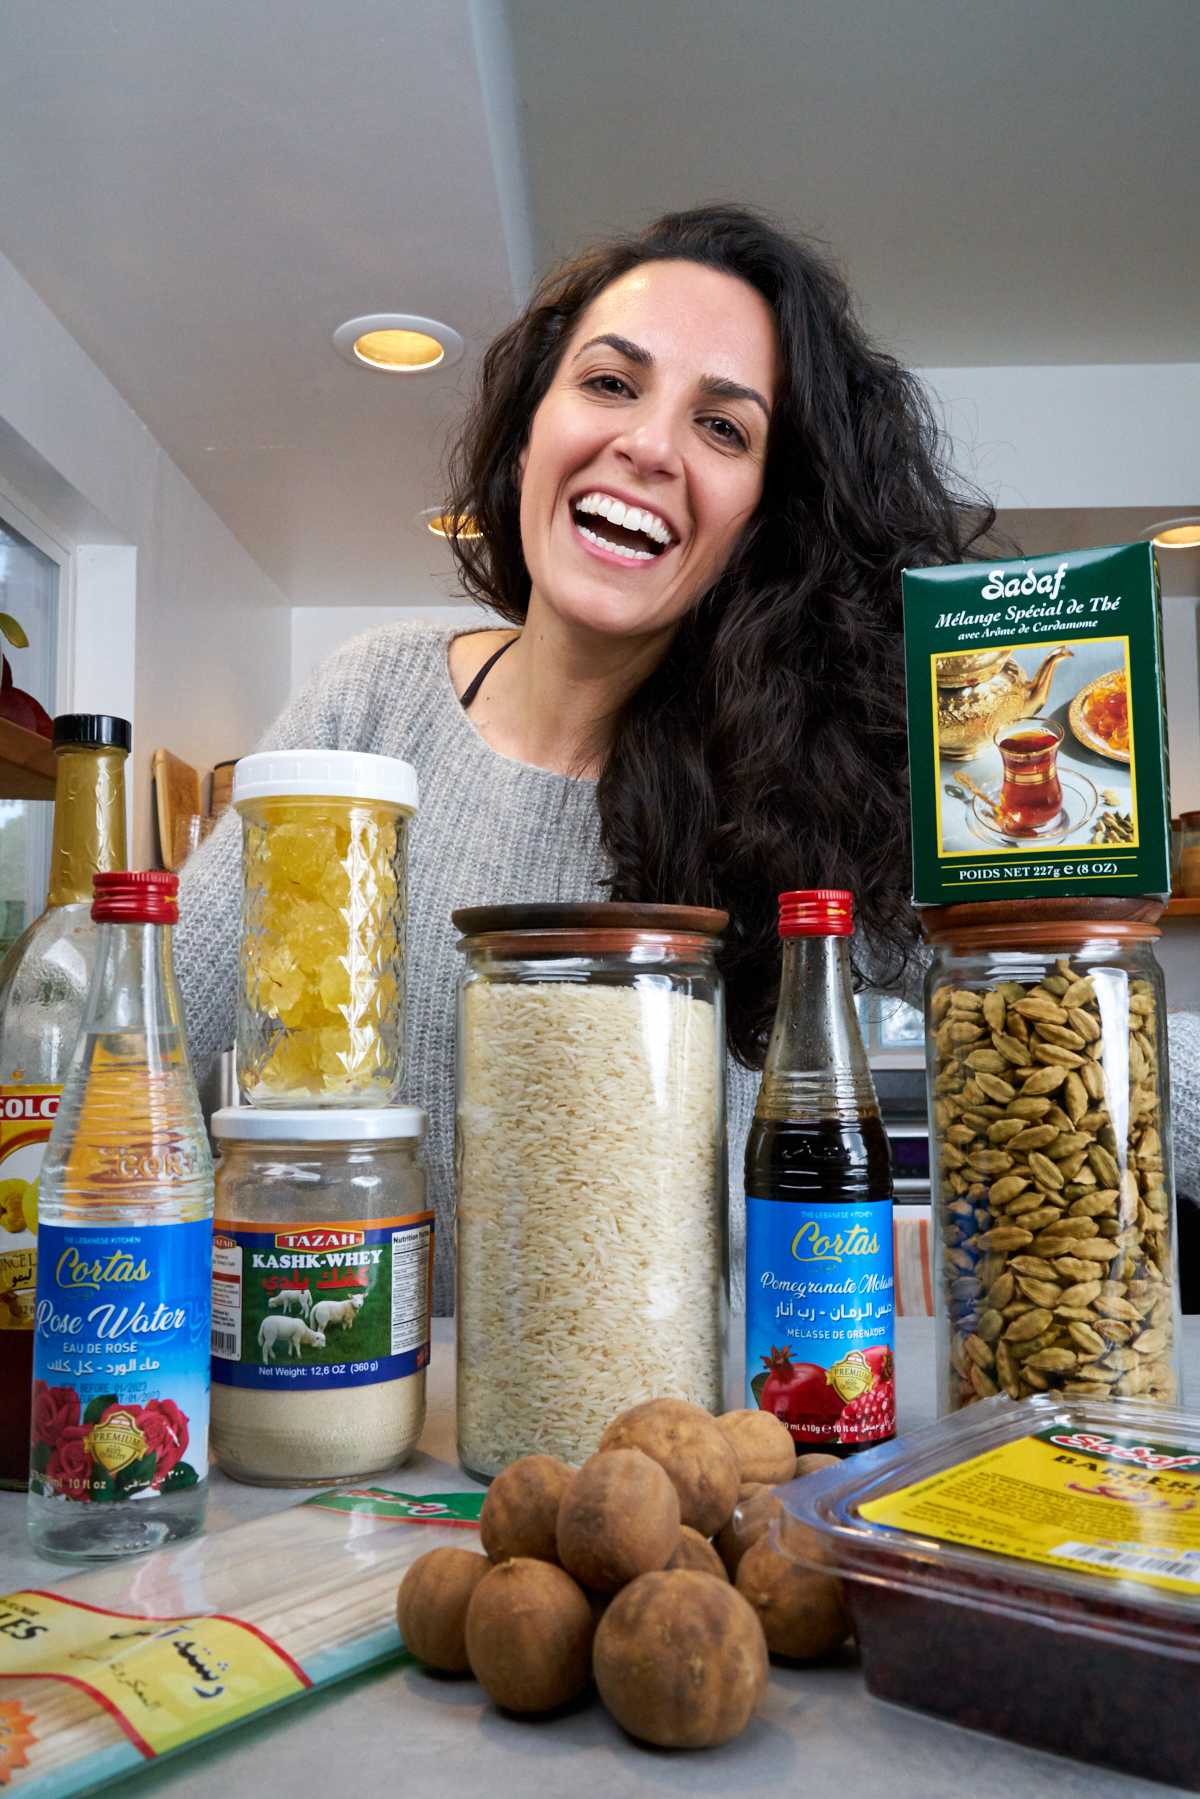 Woman in kitchen with packaged pantry foods.